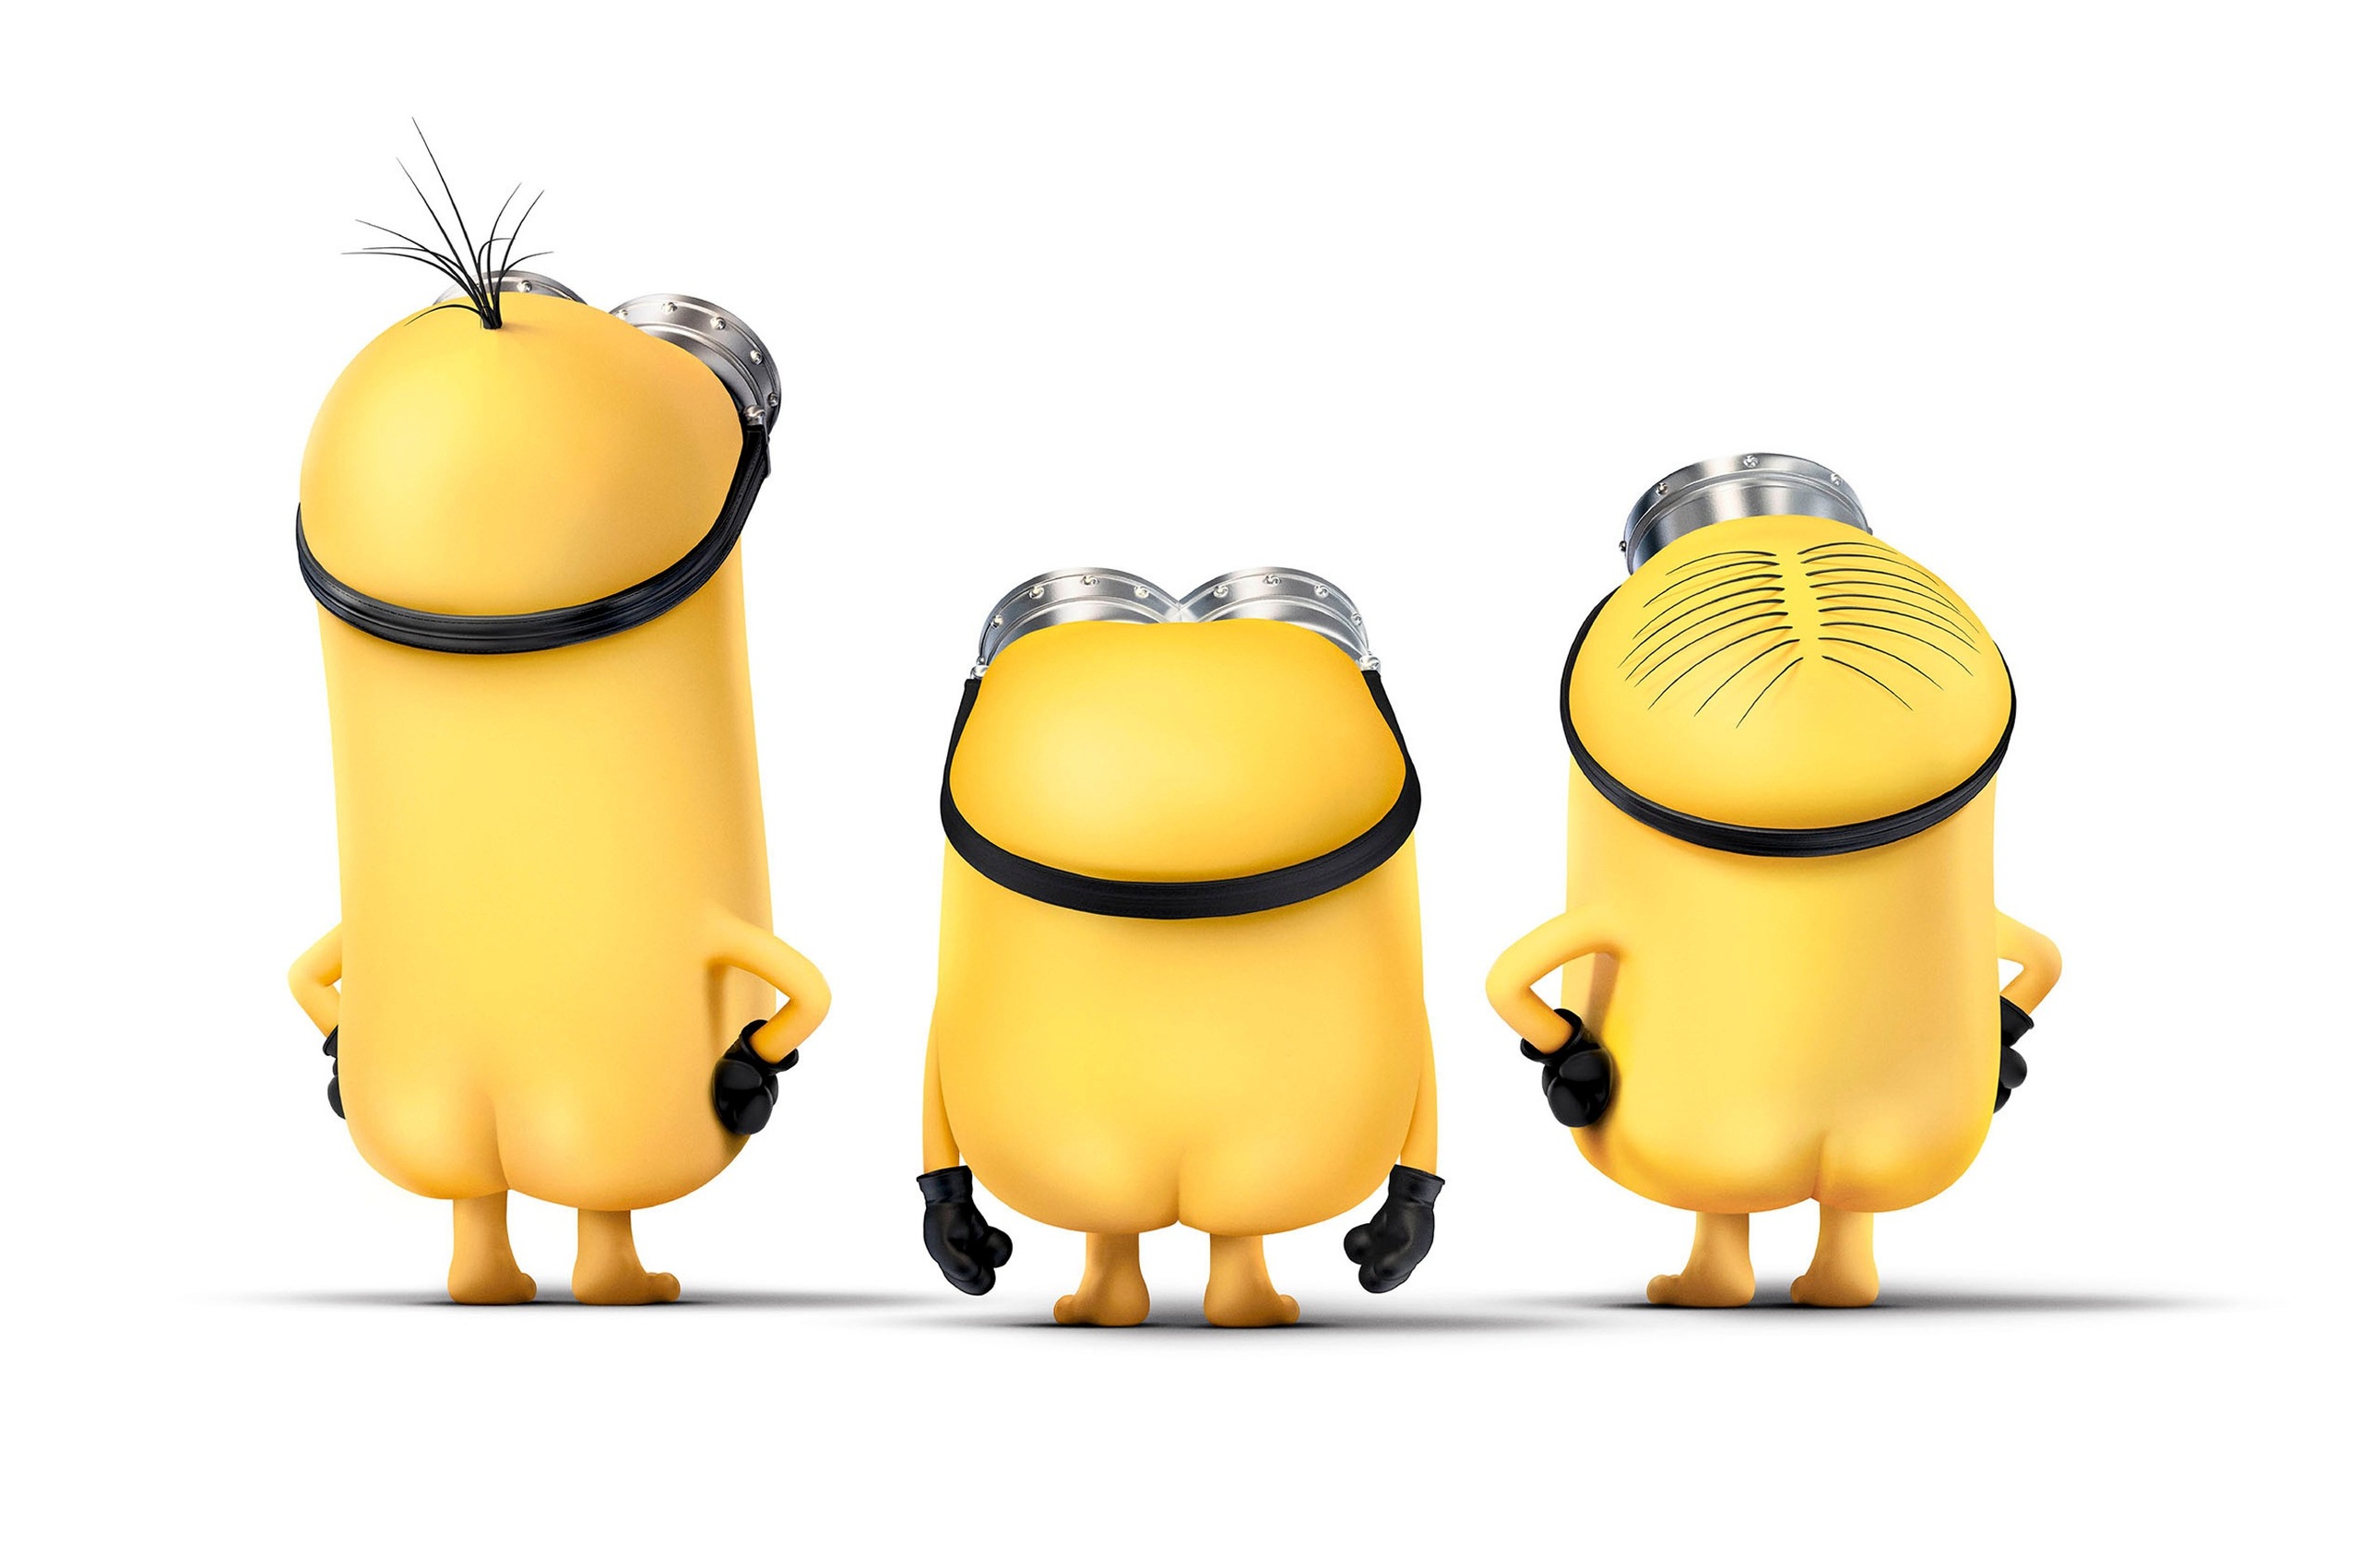 2560x1700 Minions Funny Chromebook Pixel Hd 4k Wallpapers Images Backgrounds Photos And Pictures We have a massive amount of desktop and if you're looking for the best wallpapers for chromebook then wallpapertag is the place to be. 2560x1700 minions funny chromebook